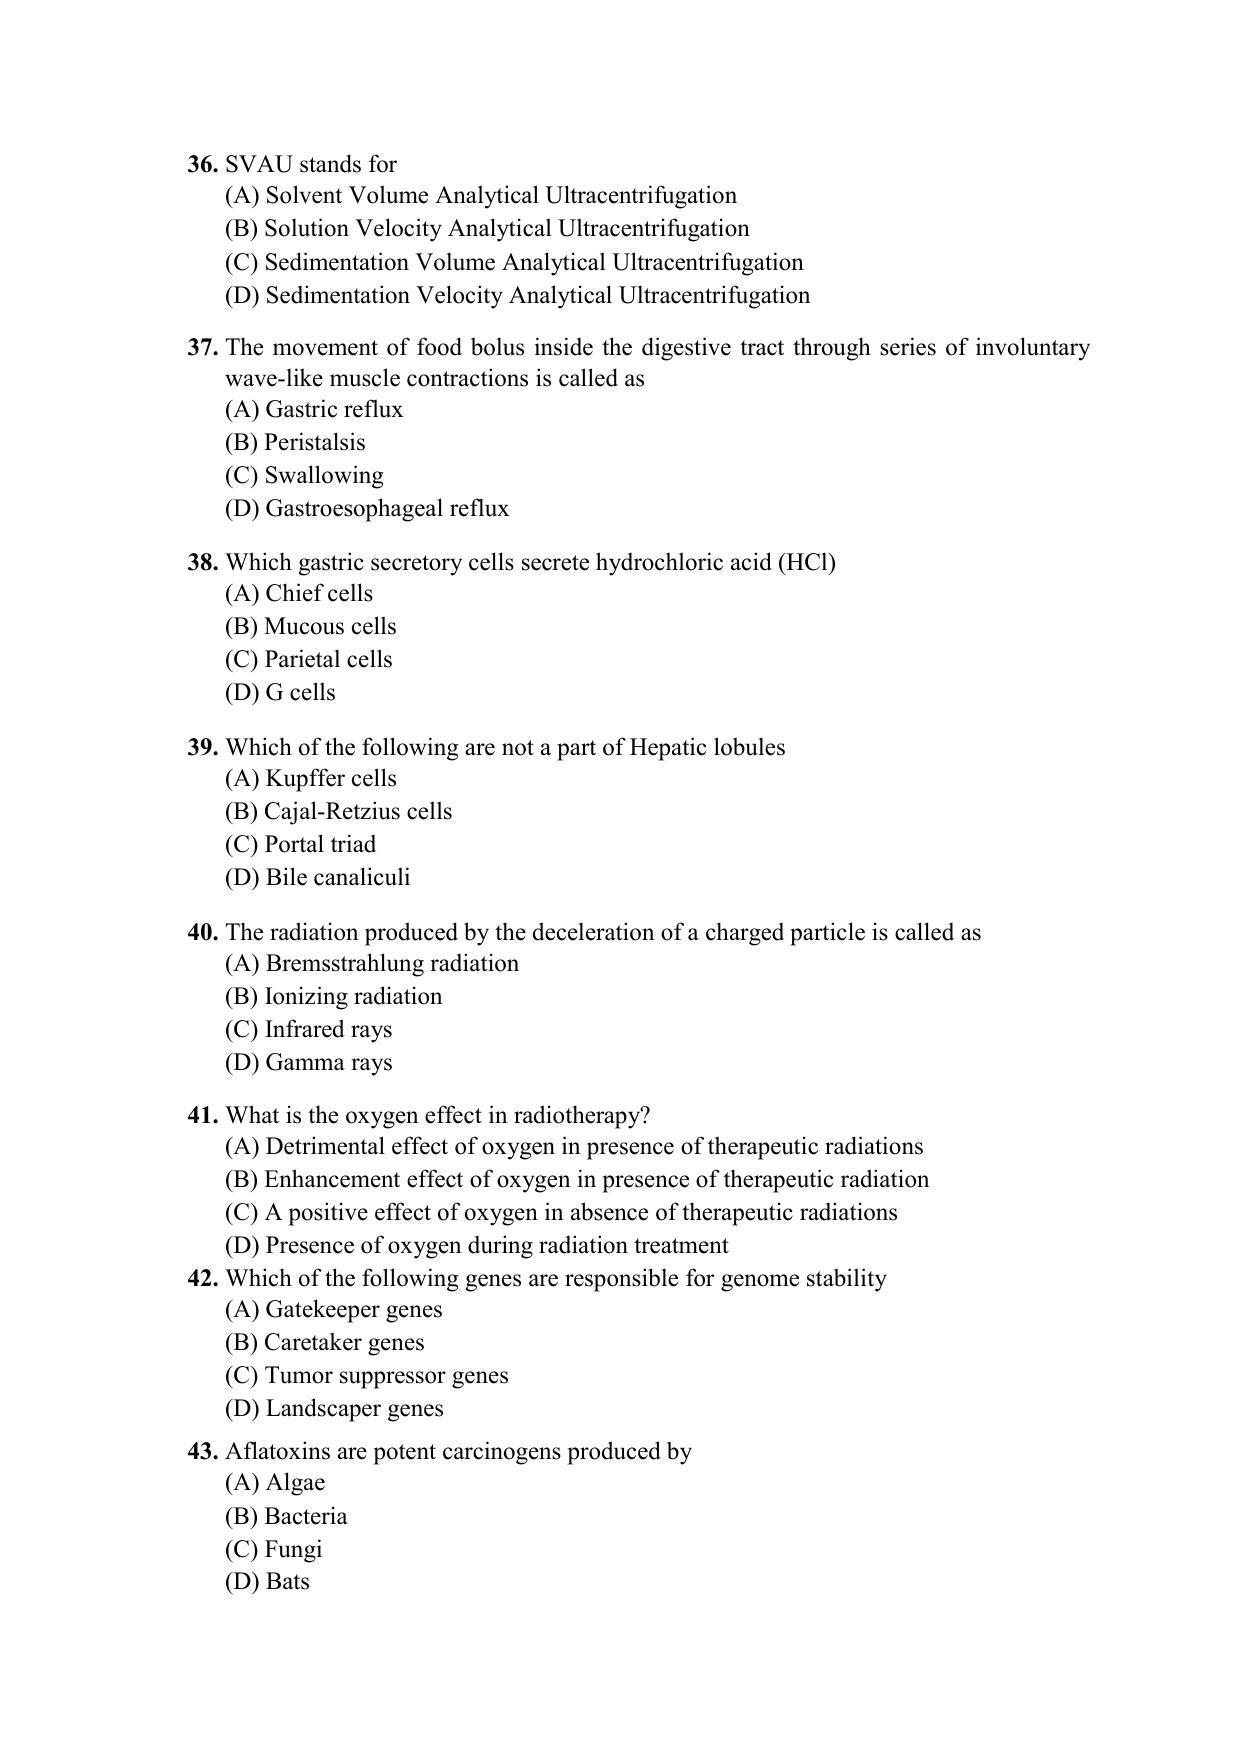 PU MPET Anthropology 2022 Question Papers - Page 16